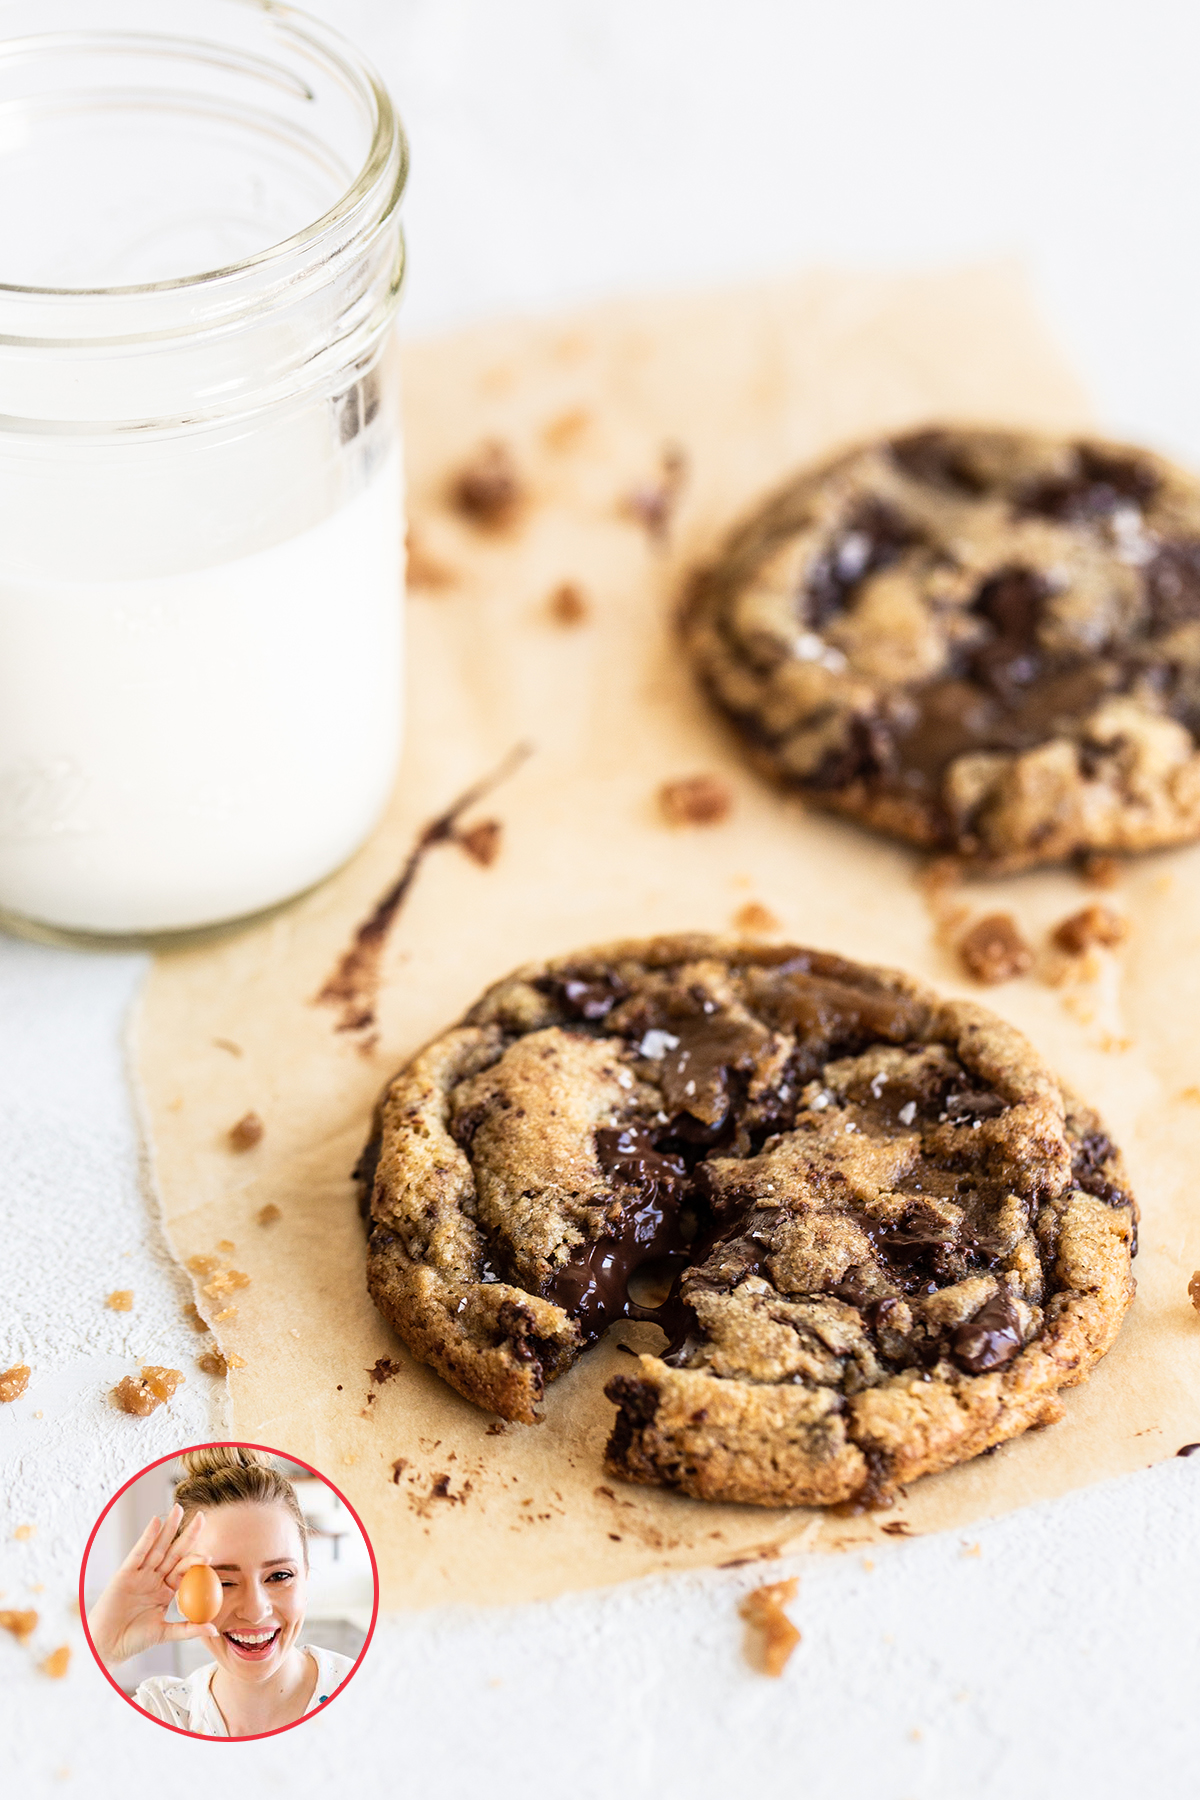 Gooey Toffee Chocolate Chip Cookies next to a glass of milk.